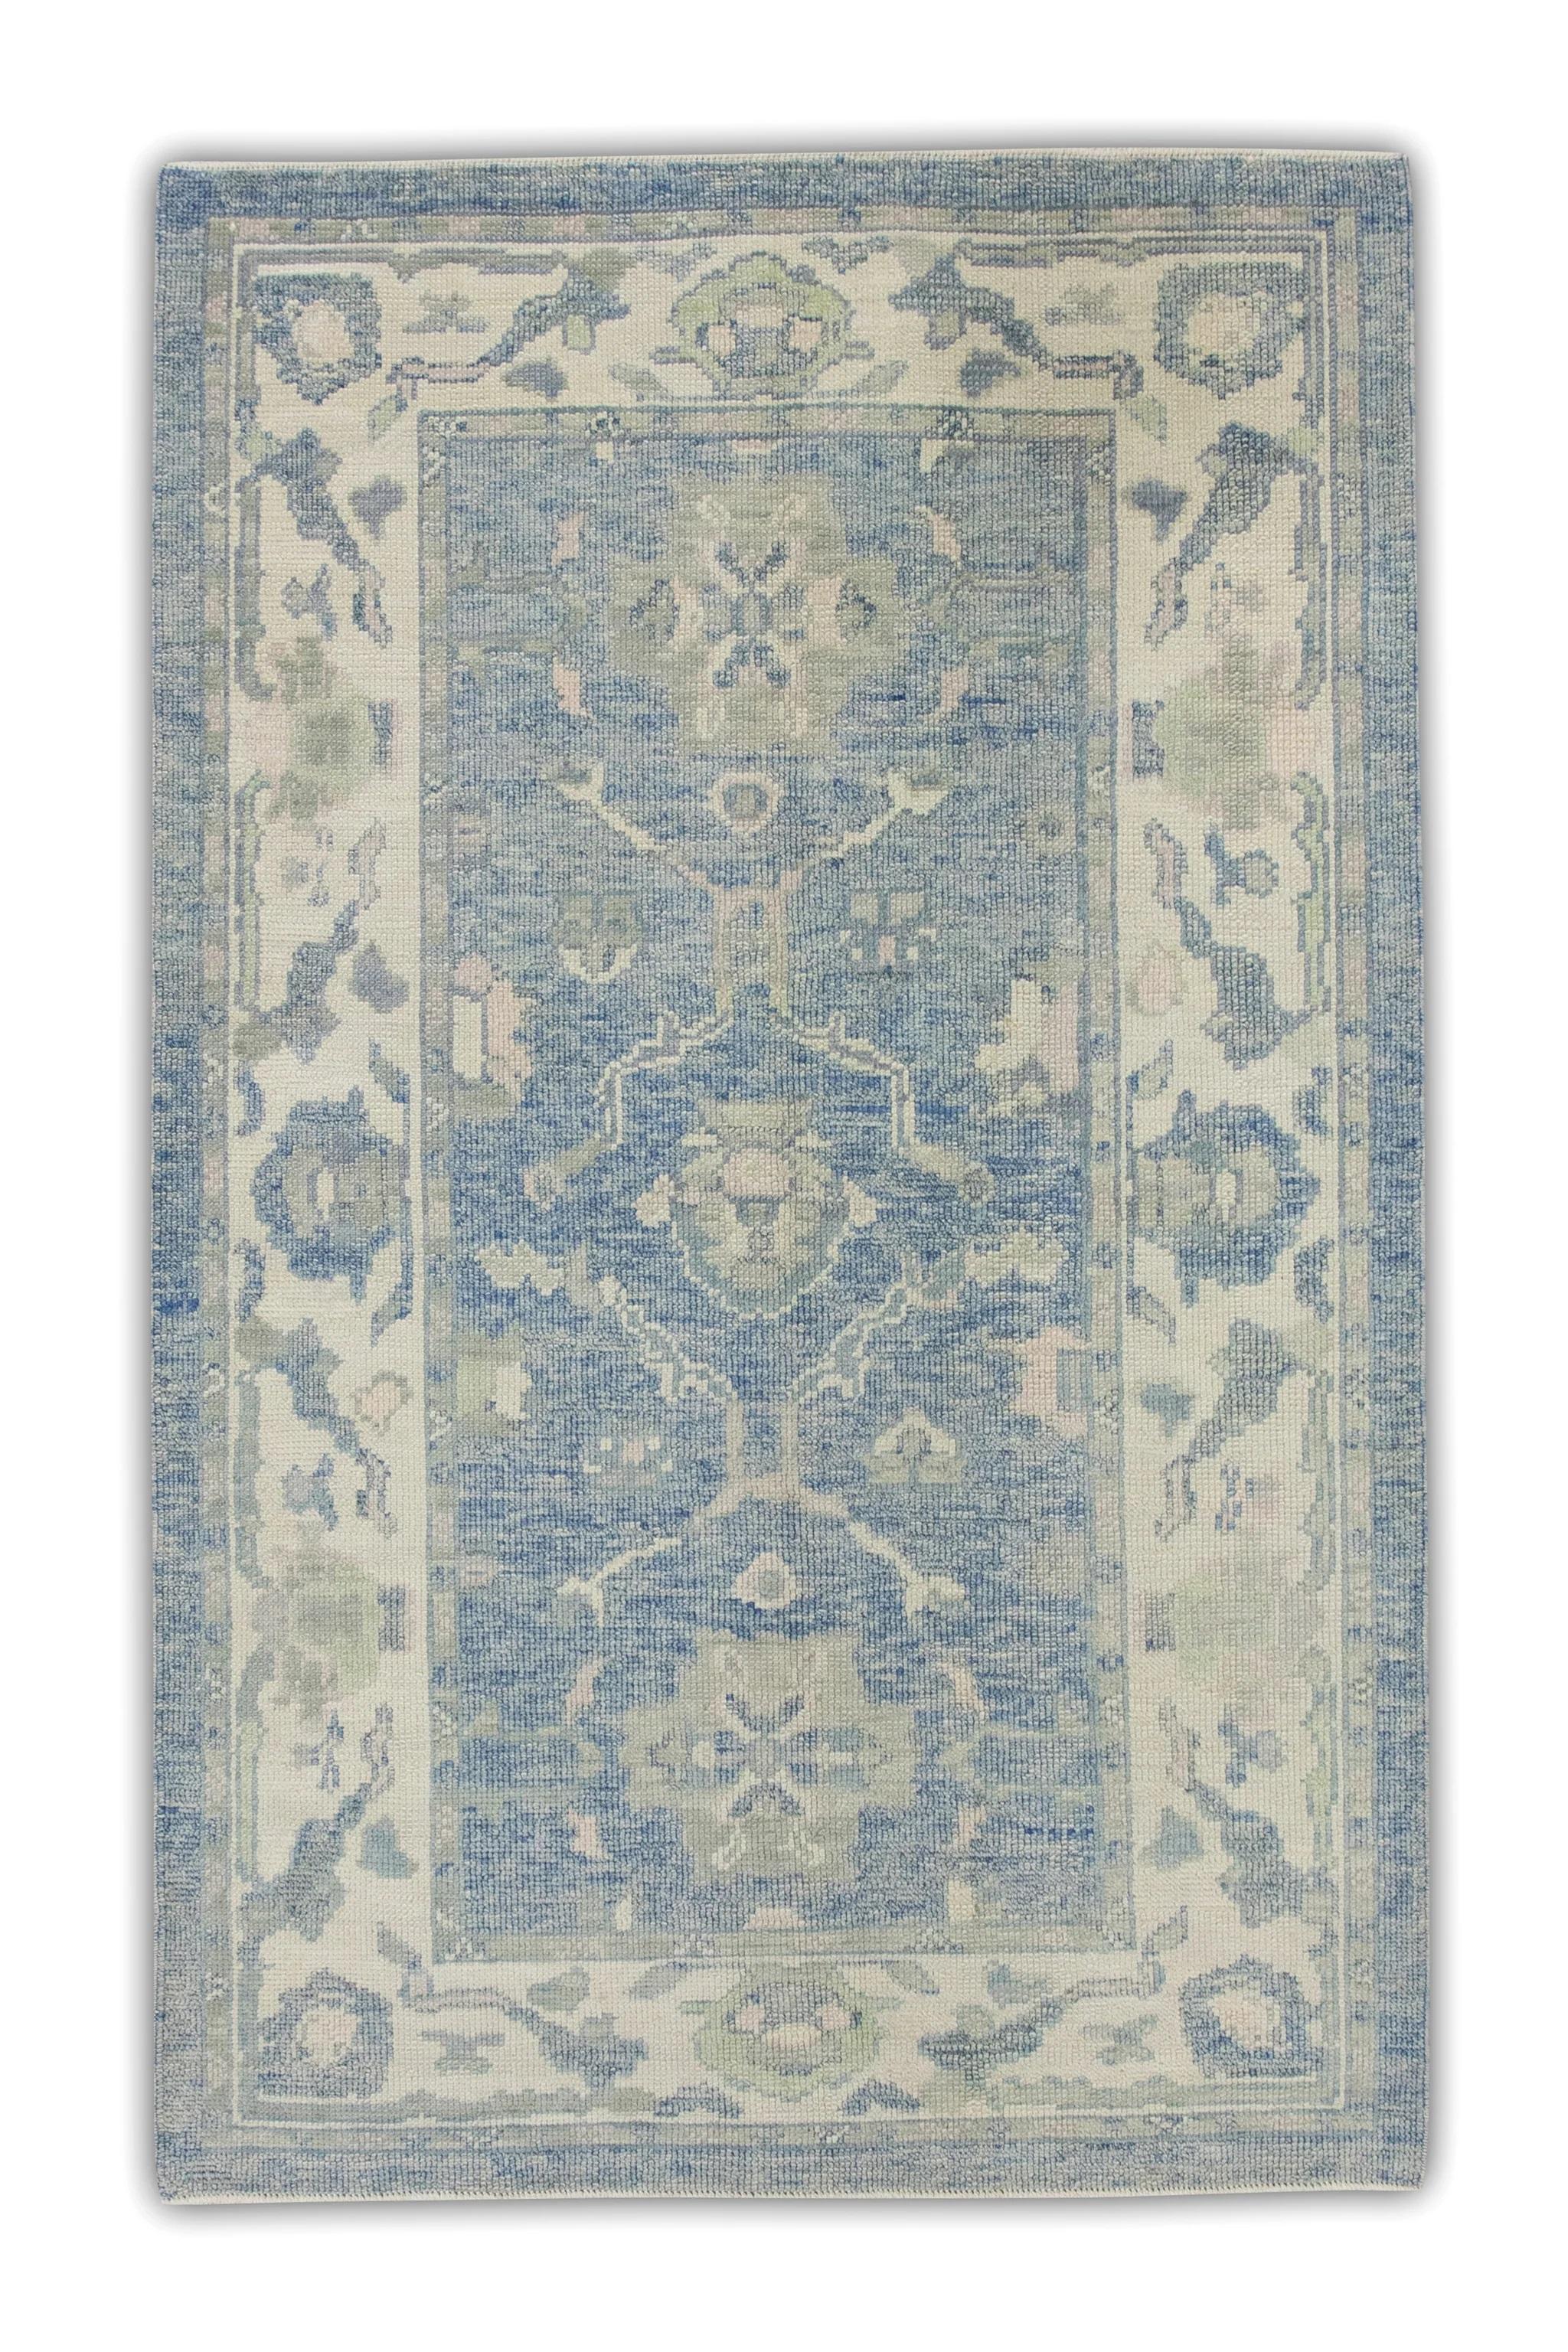 Contemporary Blue Handwoven Wool Turkish Oushak Rug with Green Floral Pattern 4'1